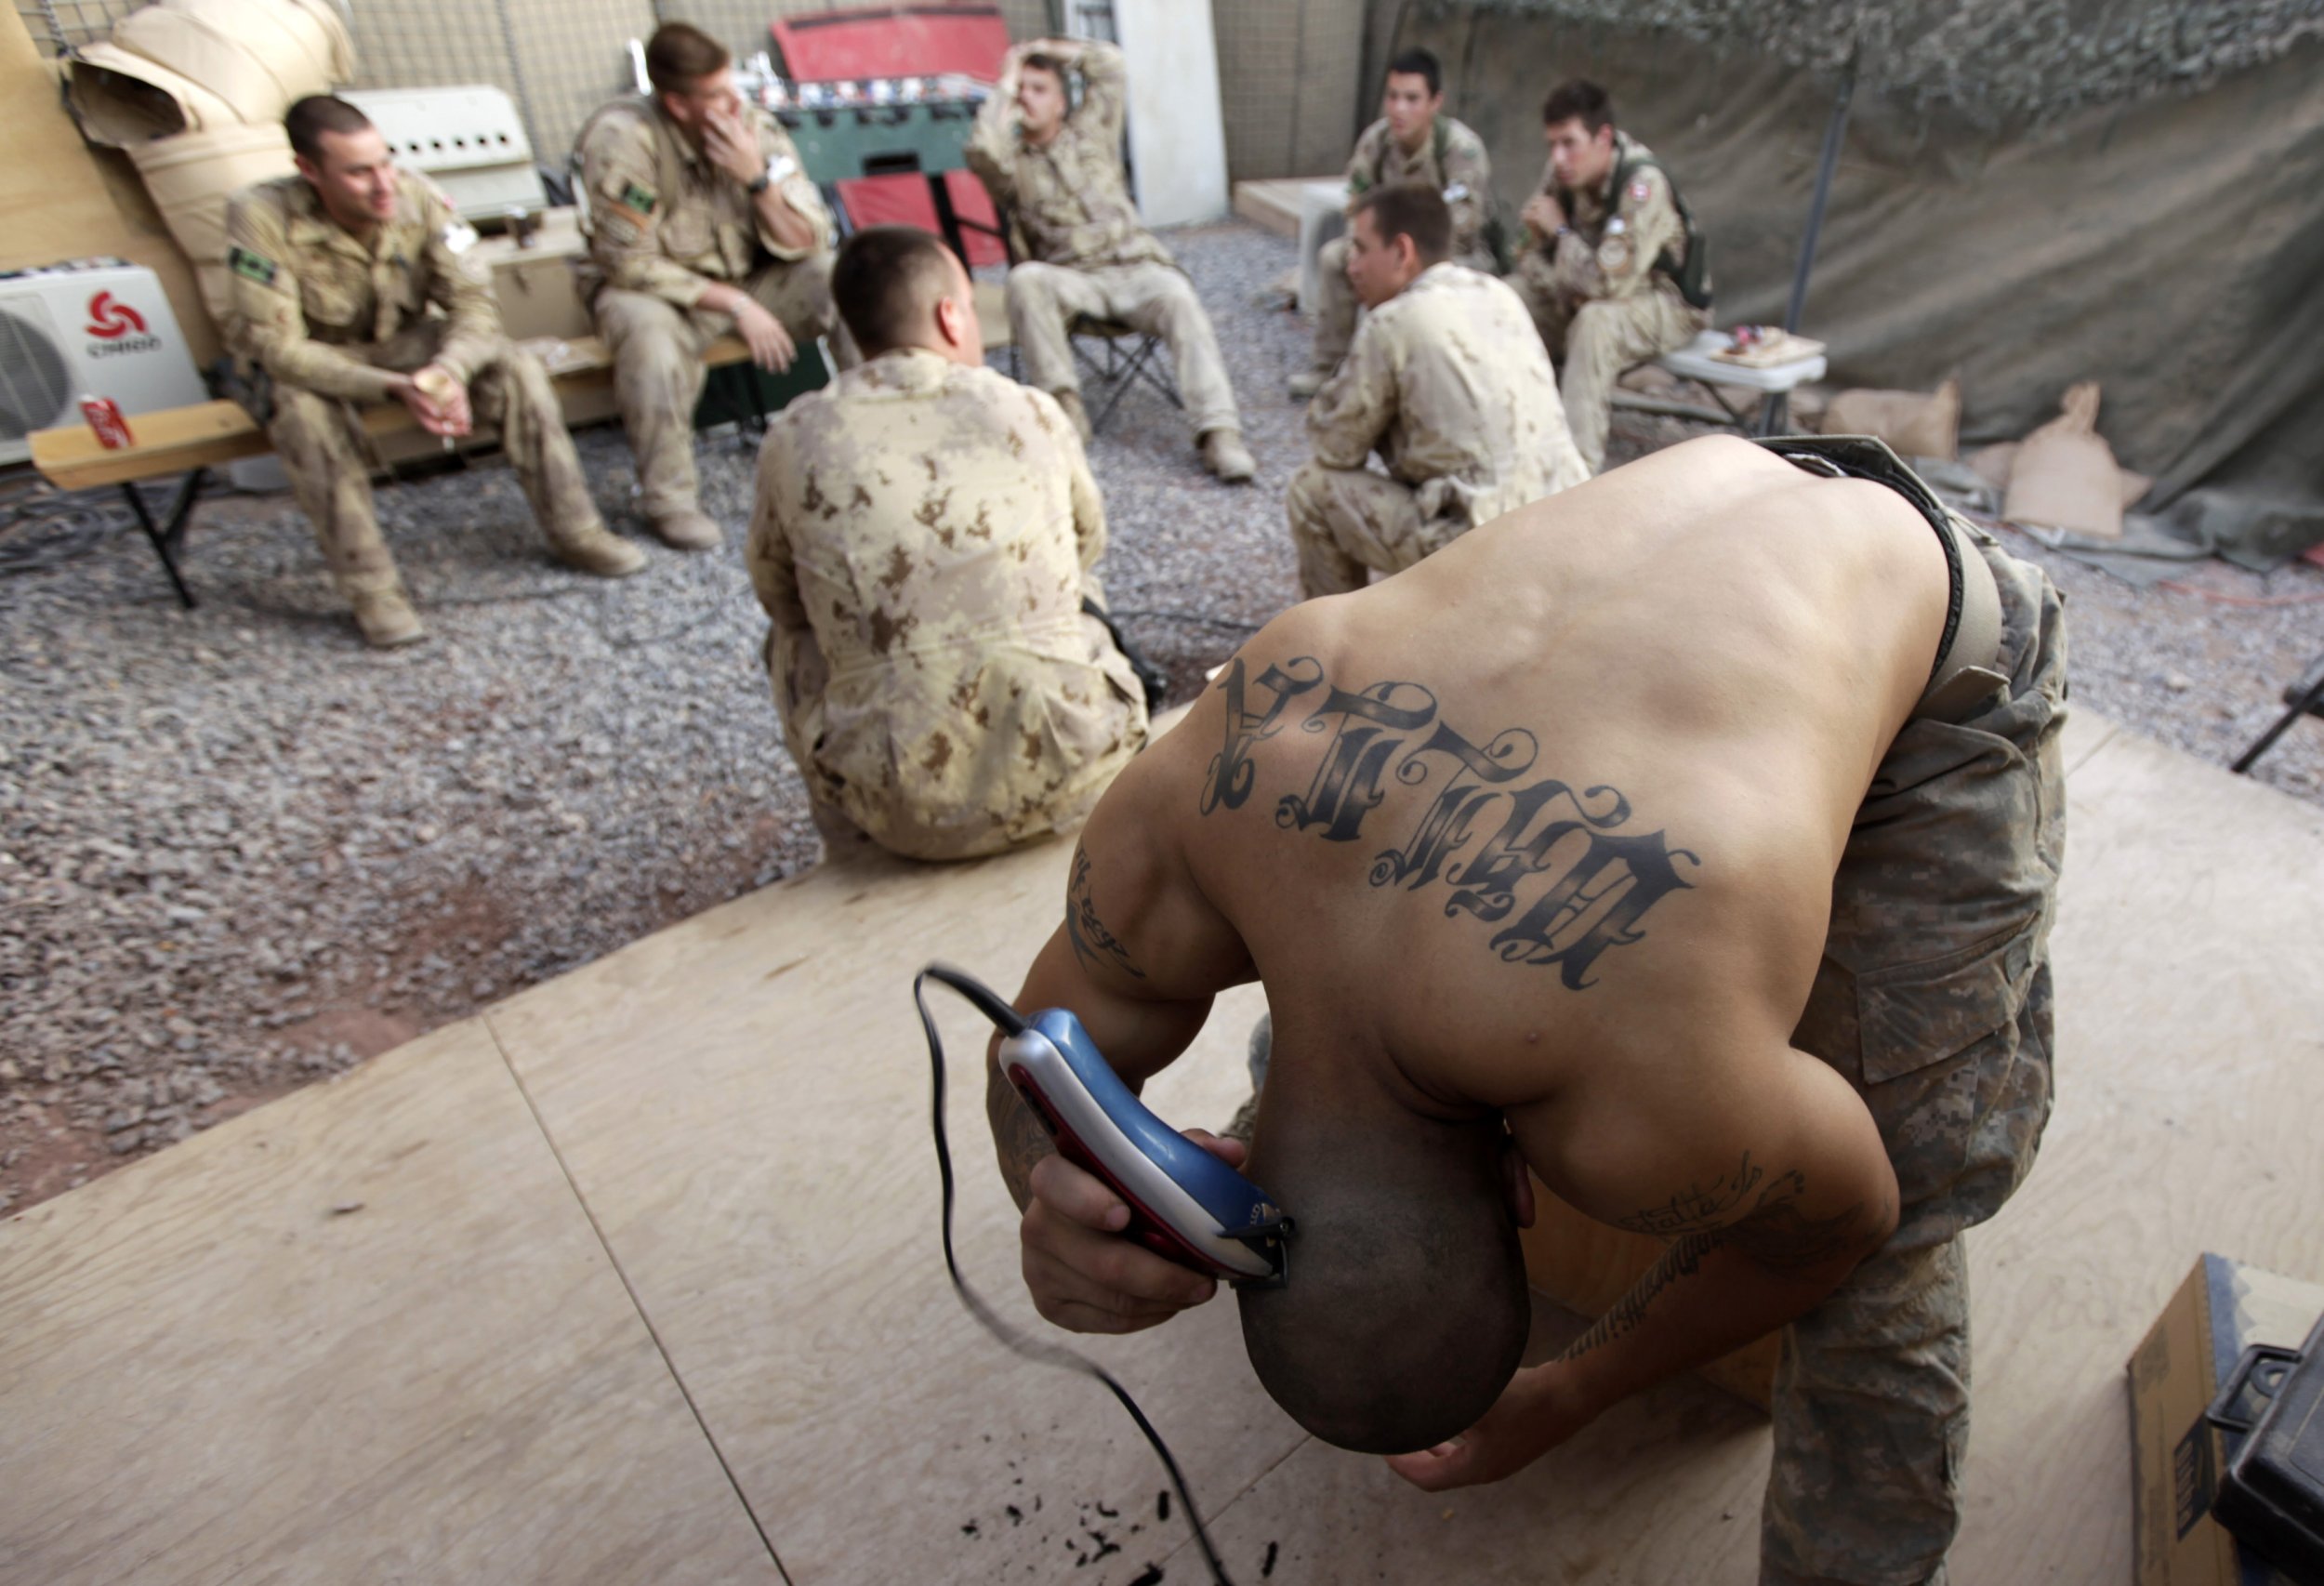 US Army WTF moments  Ill take tattoos Ill regret in 3 years for 500  Alex  Facebook